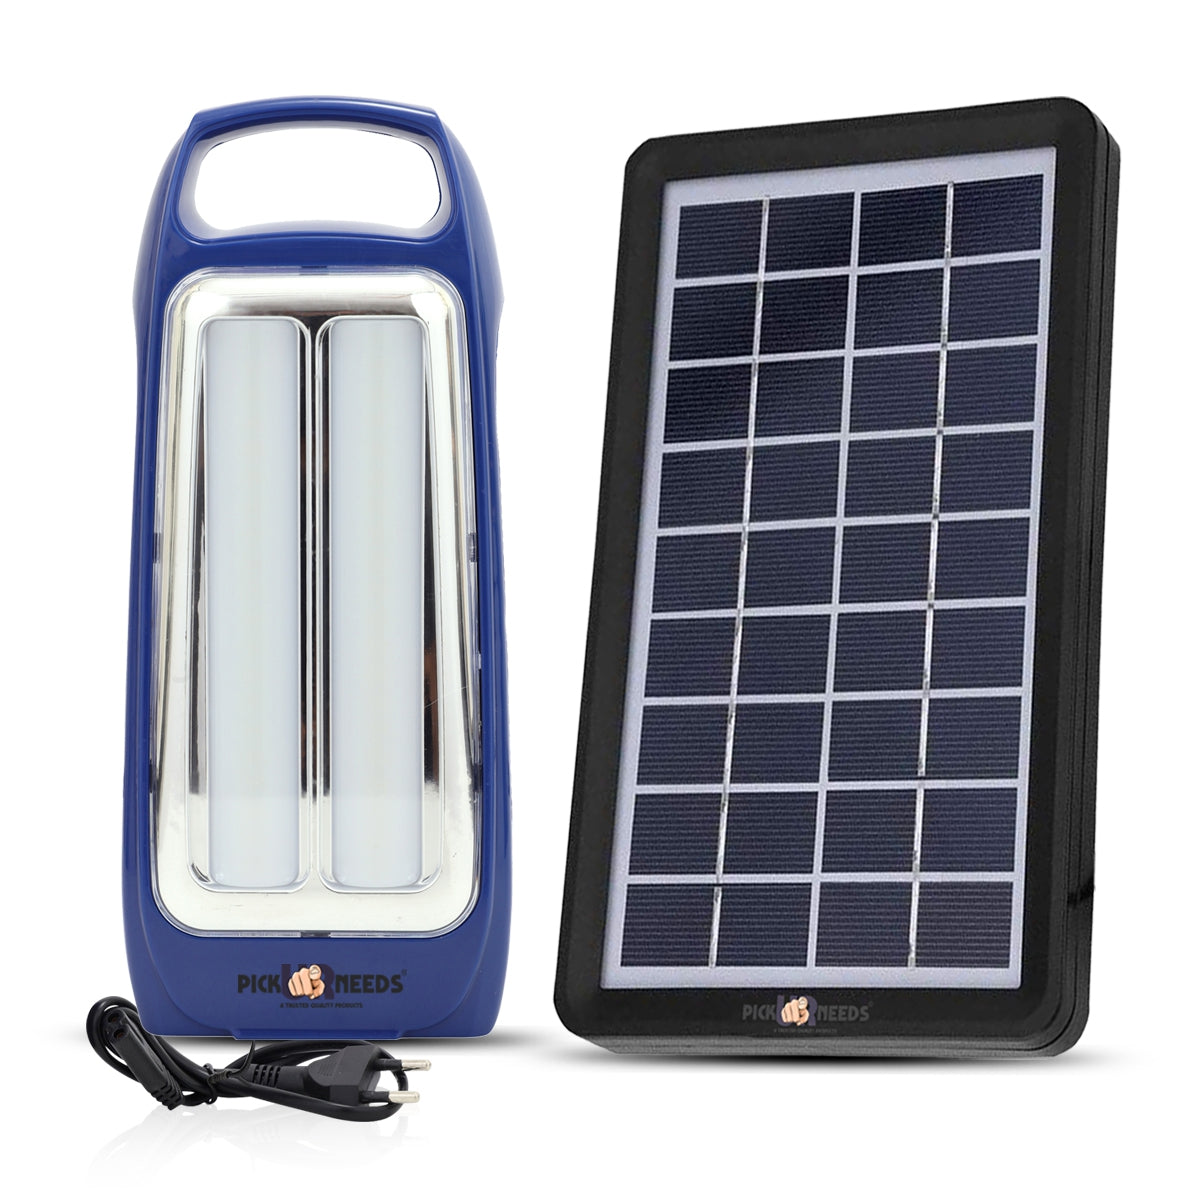 Pick Ur Needs Rechargeable 2 Tube LED Lantern Lamp Home Emergency Light with Eco Friendly Solar Panel